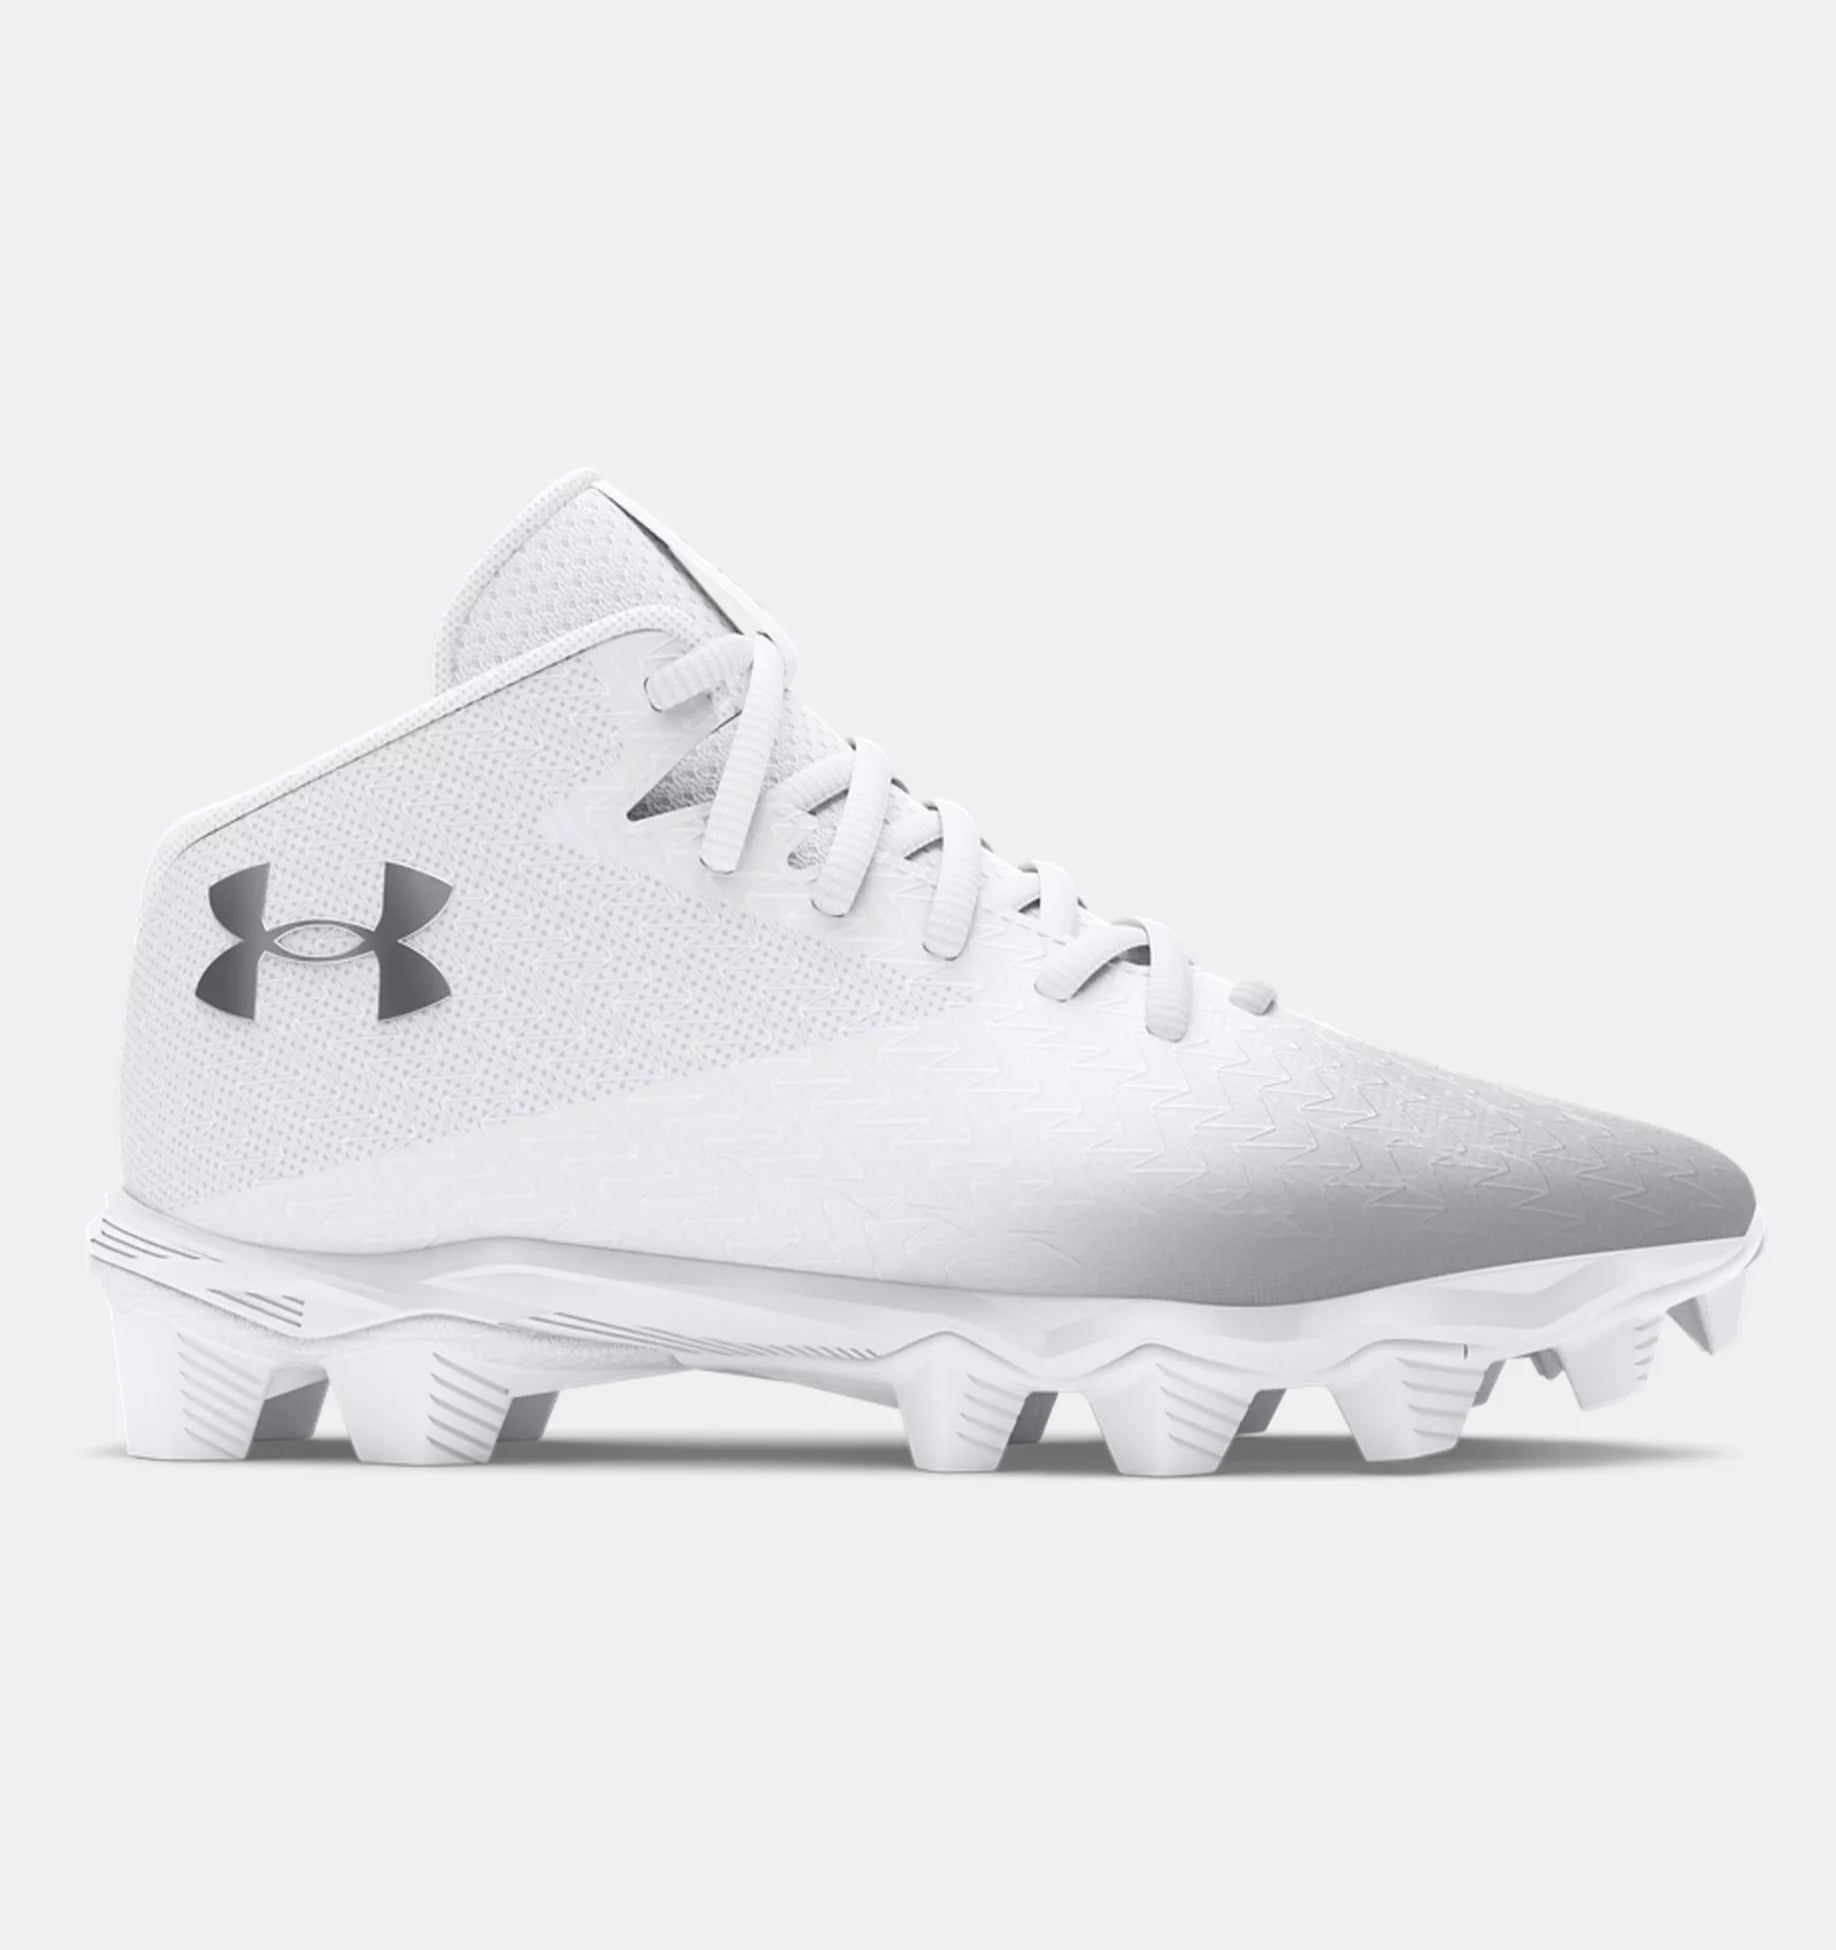 Under Armour Spotlight Franchise 4.0 Rm Junior Football Cleats-Under Armour-Sports Replay - Sports Excellence